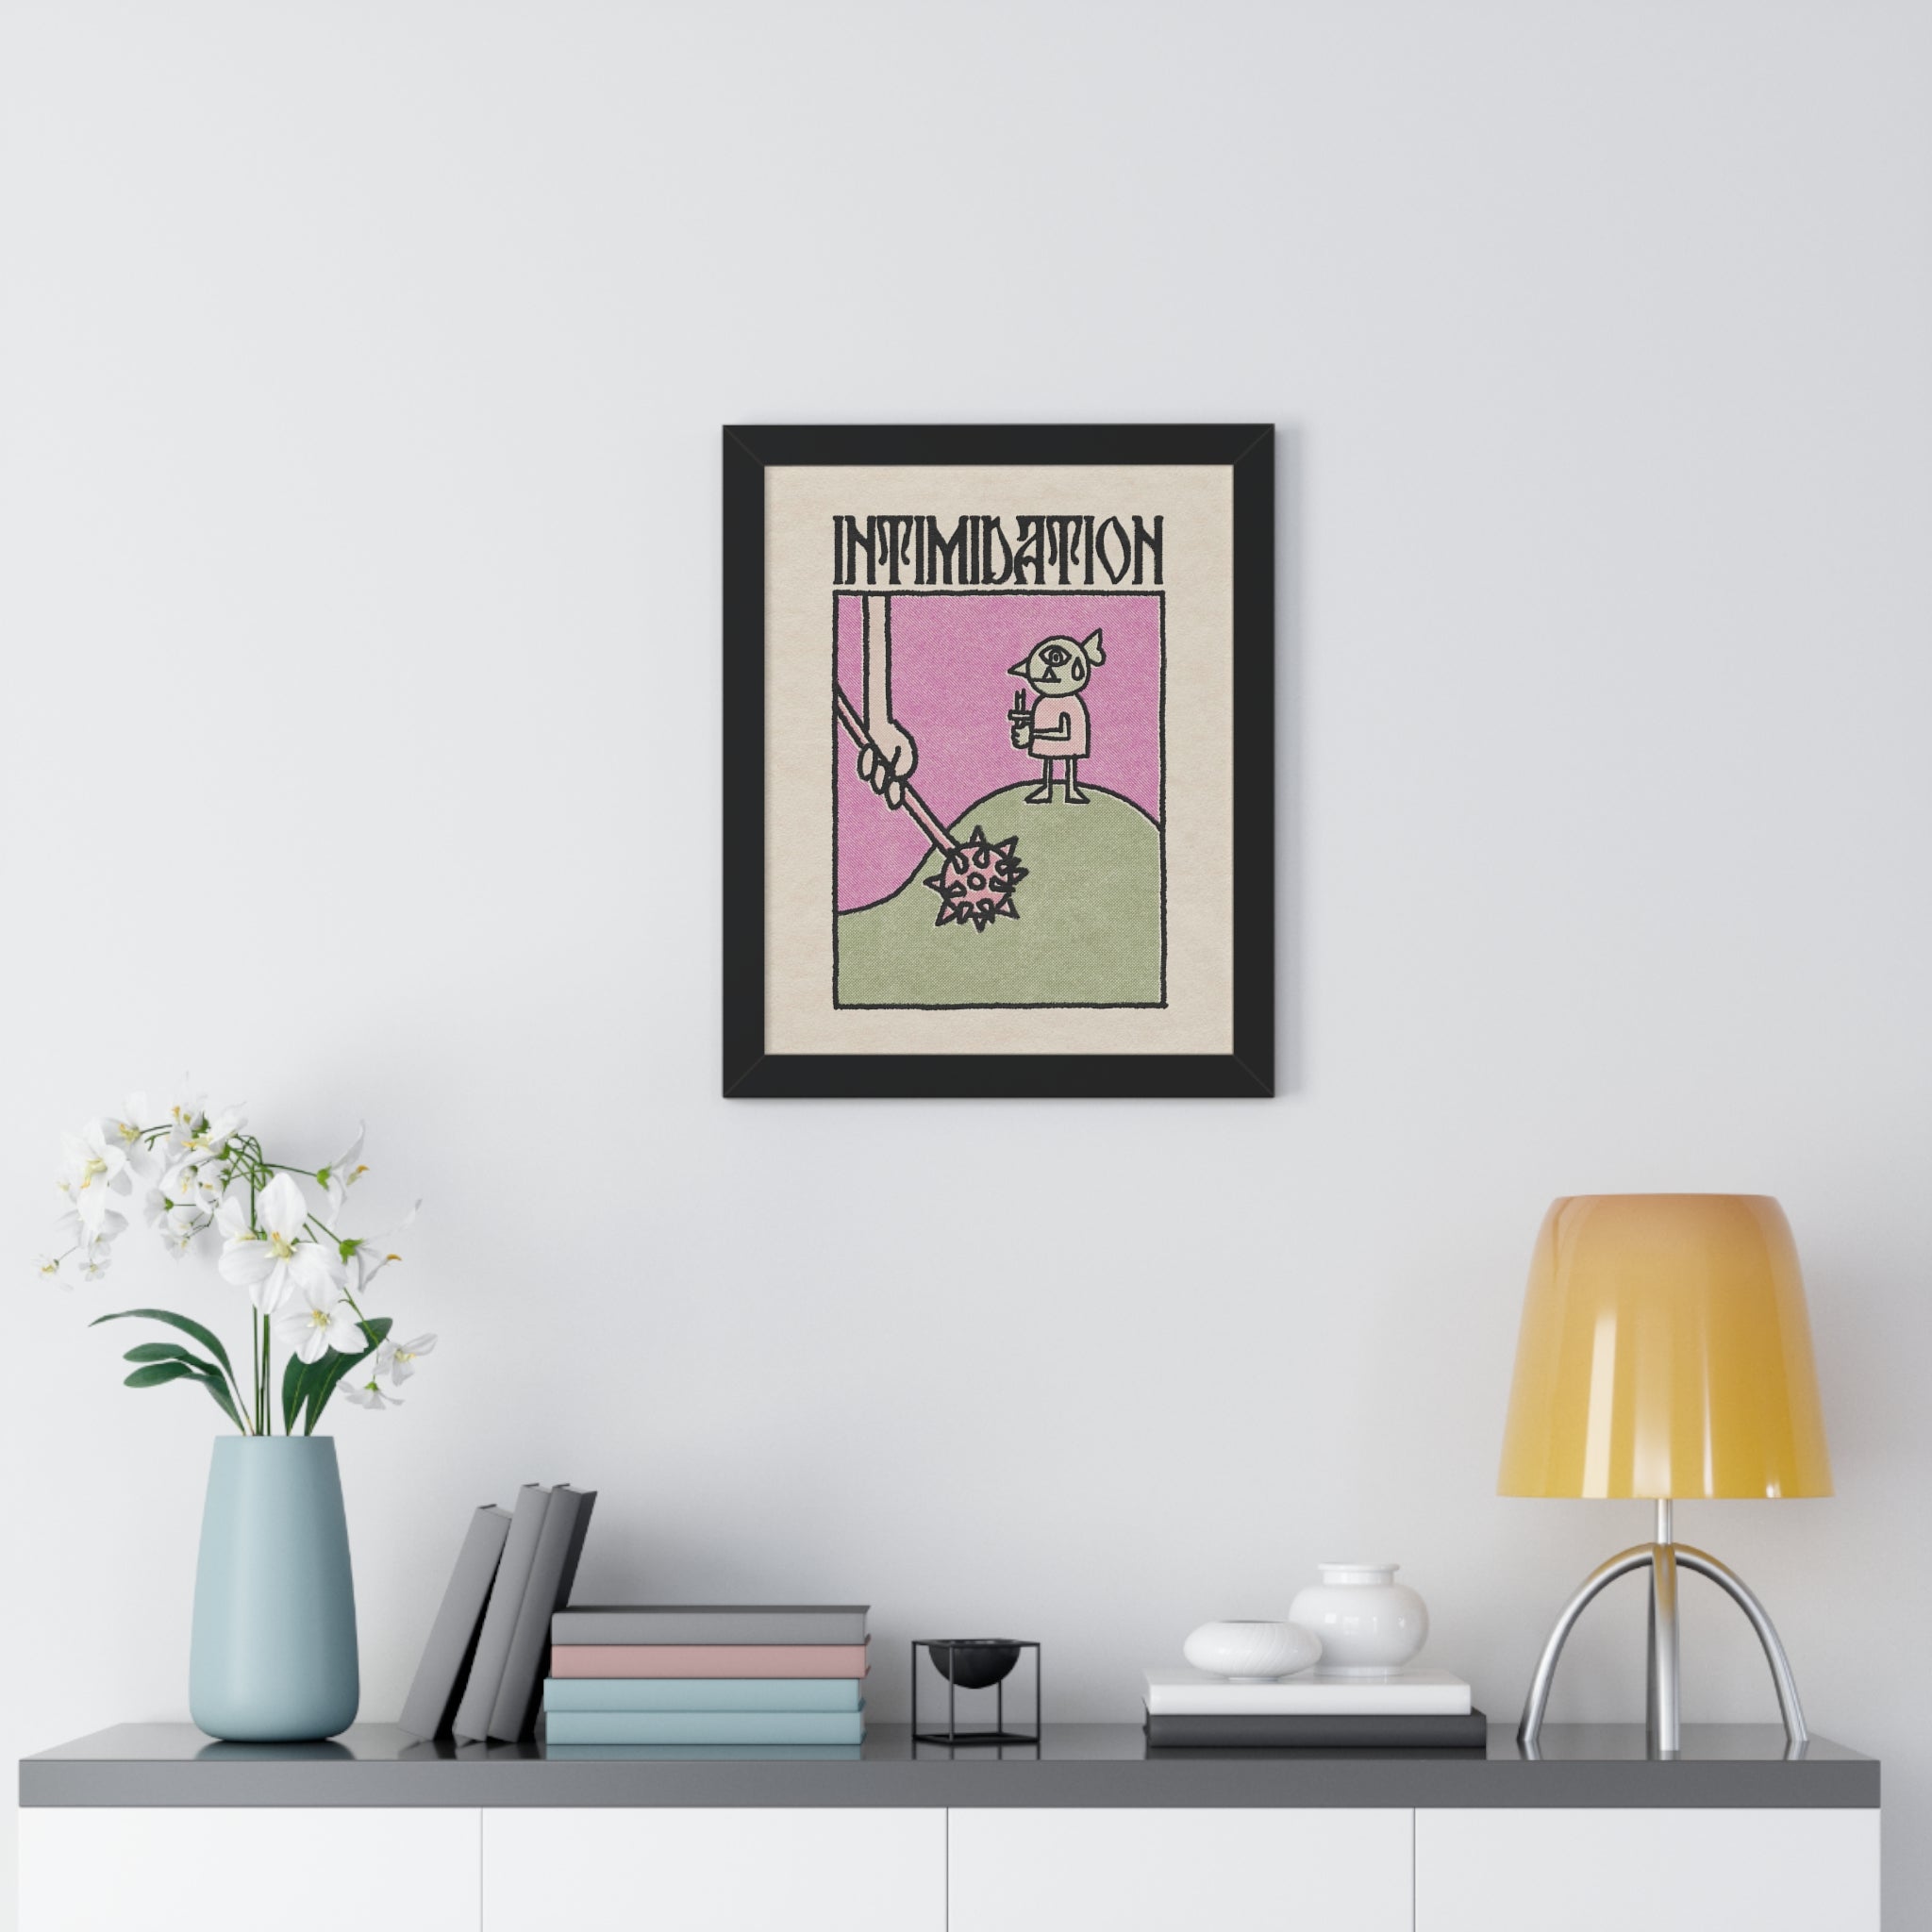 Intimidation | Framed Poster - Poster - Ace of Gnomes - 33982412357589947197